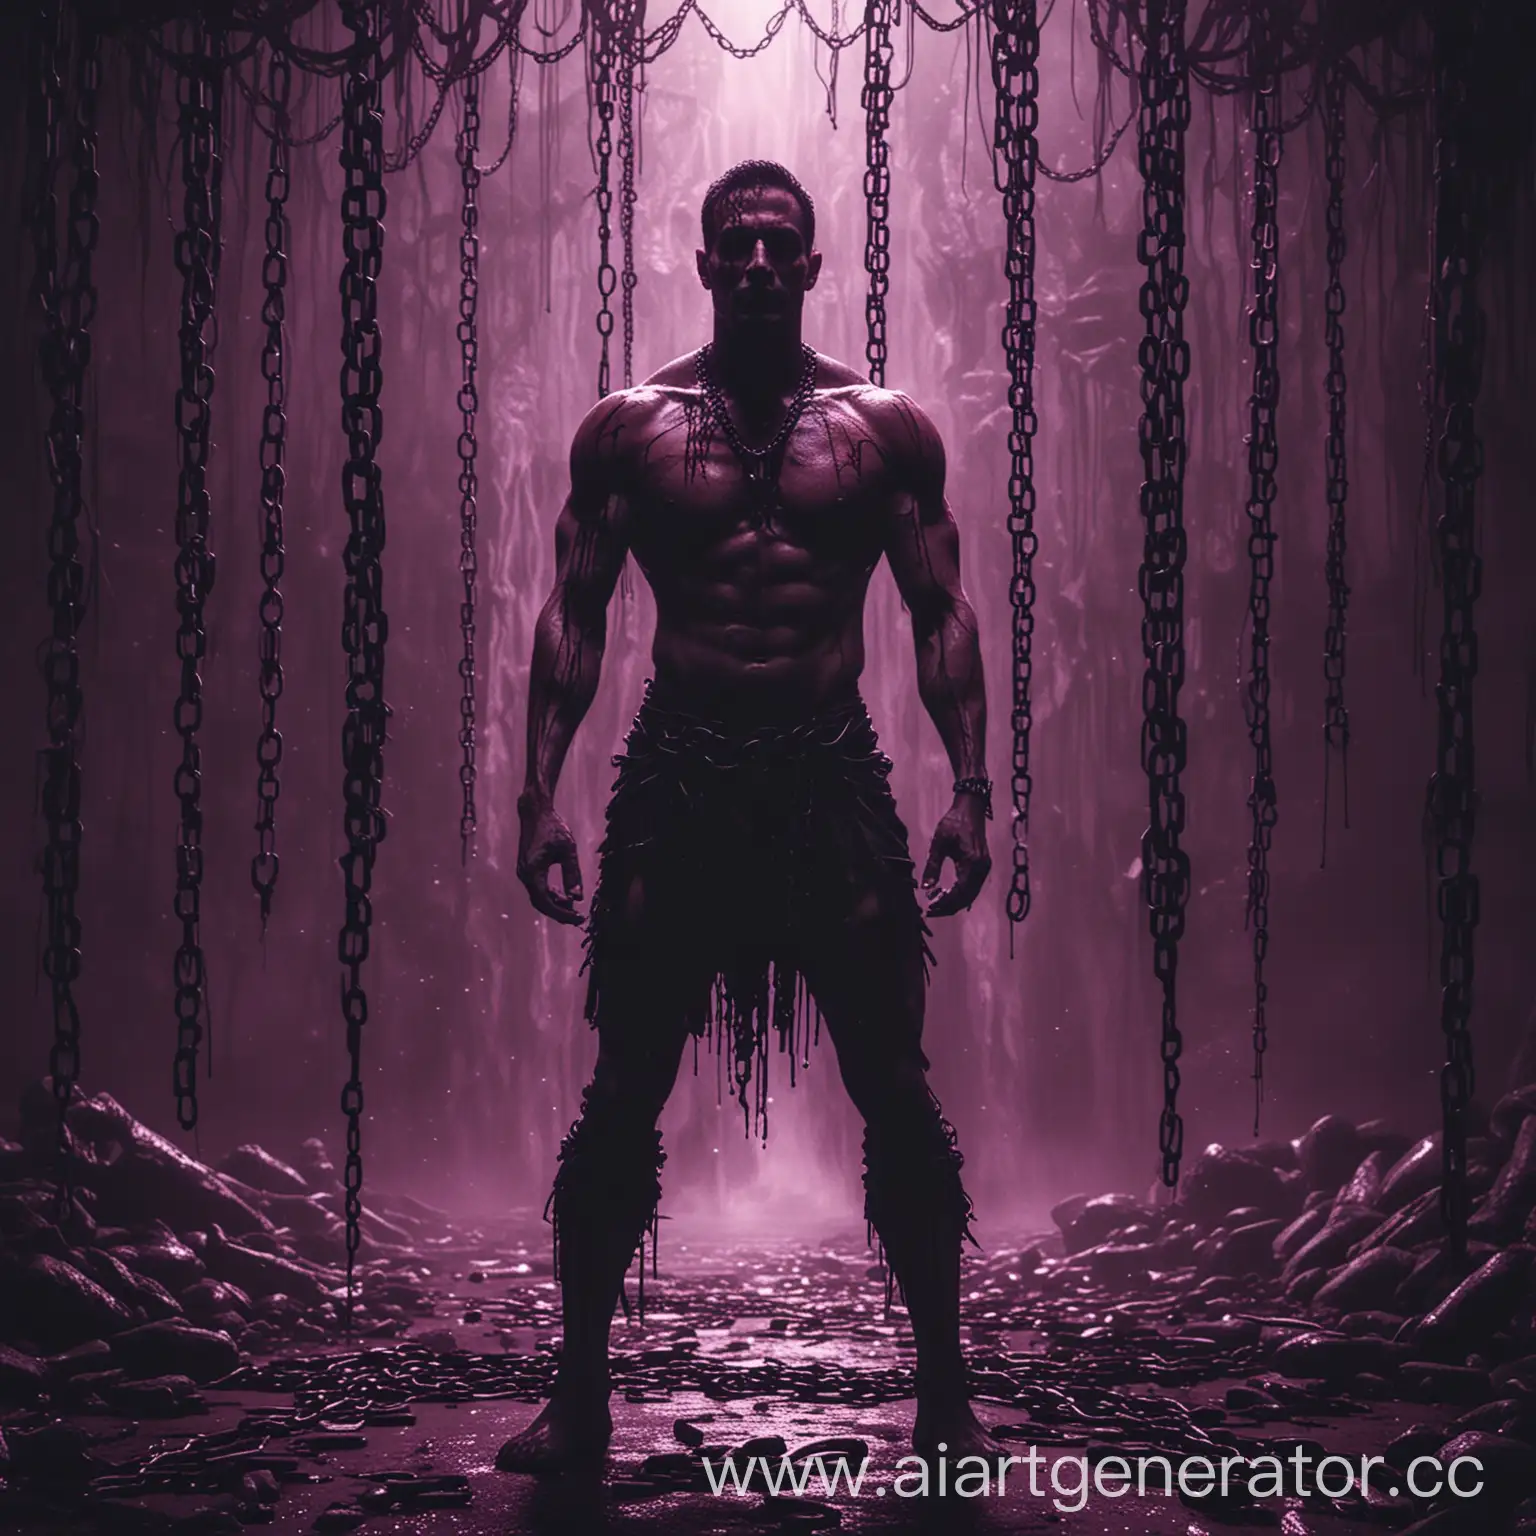 Menacing-Shadow-Figure-with-Muscular-Build-amidst-Chains-and-Blood-Waterfall